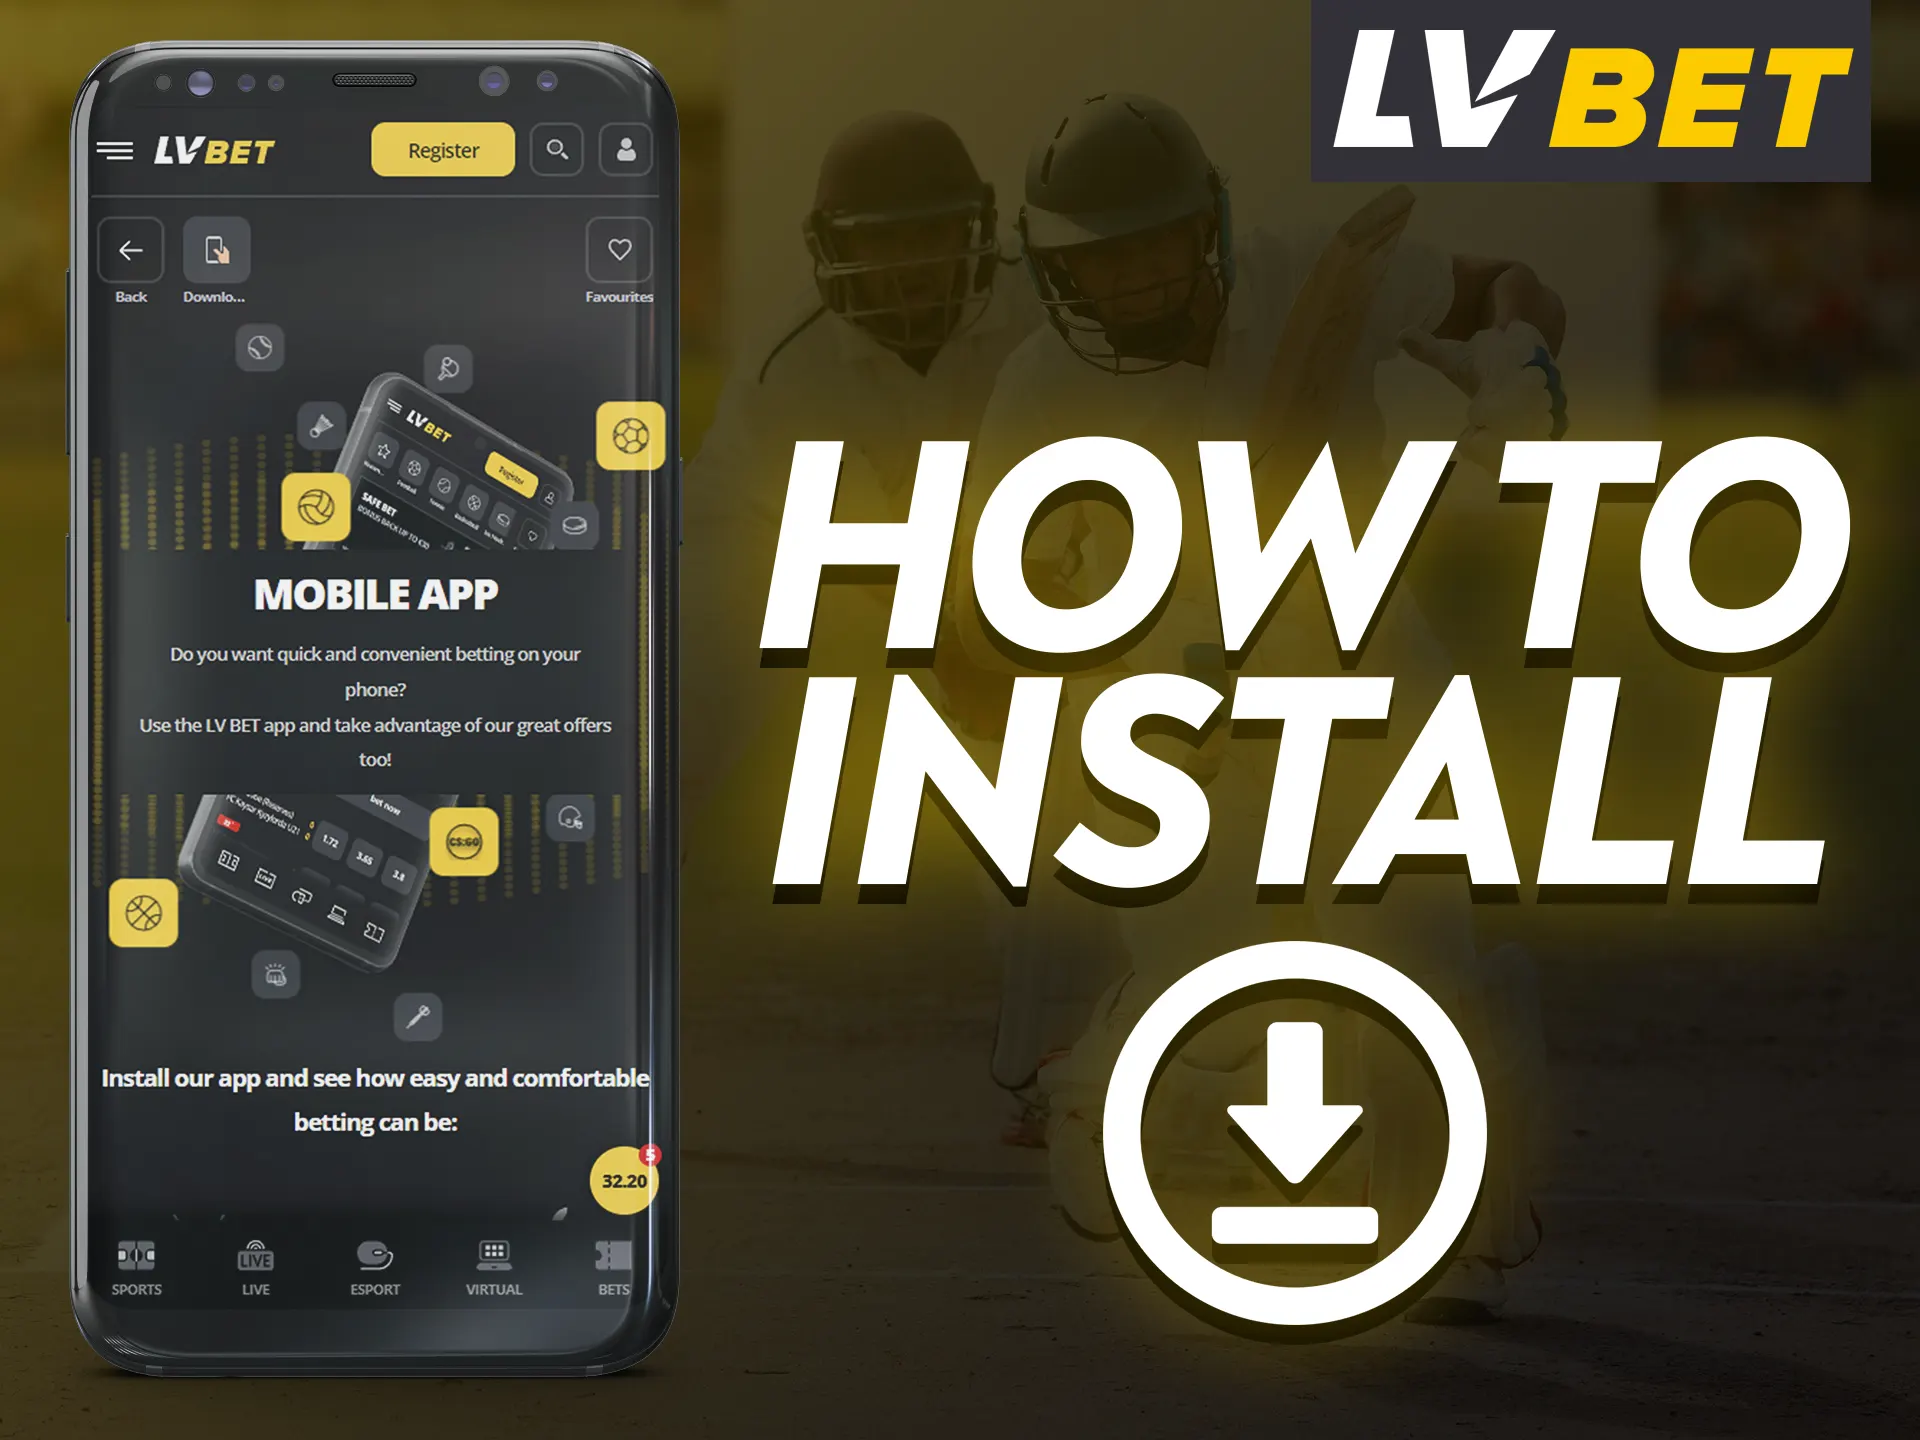 Install the LV Bet app with these instructions.